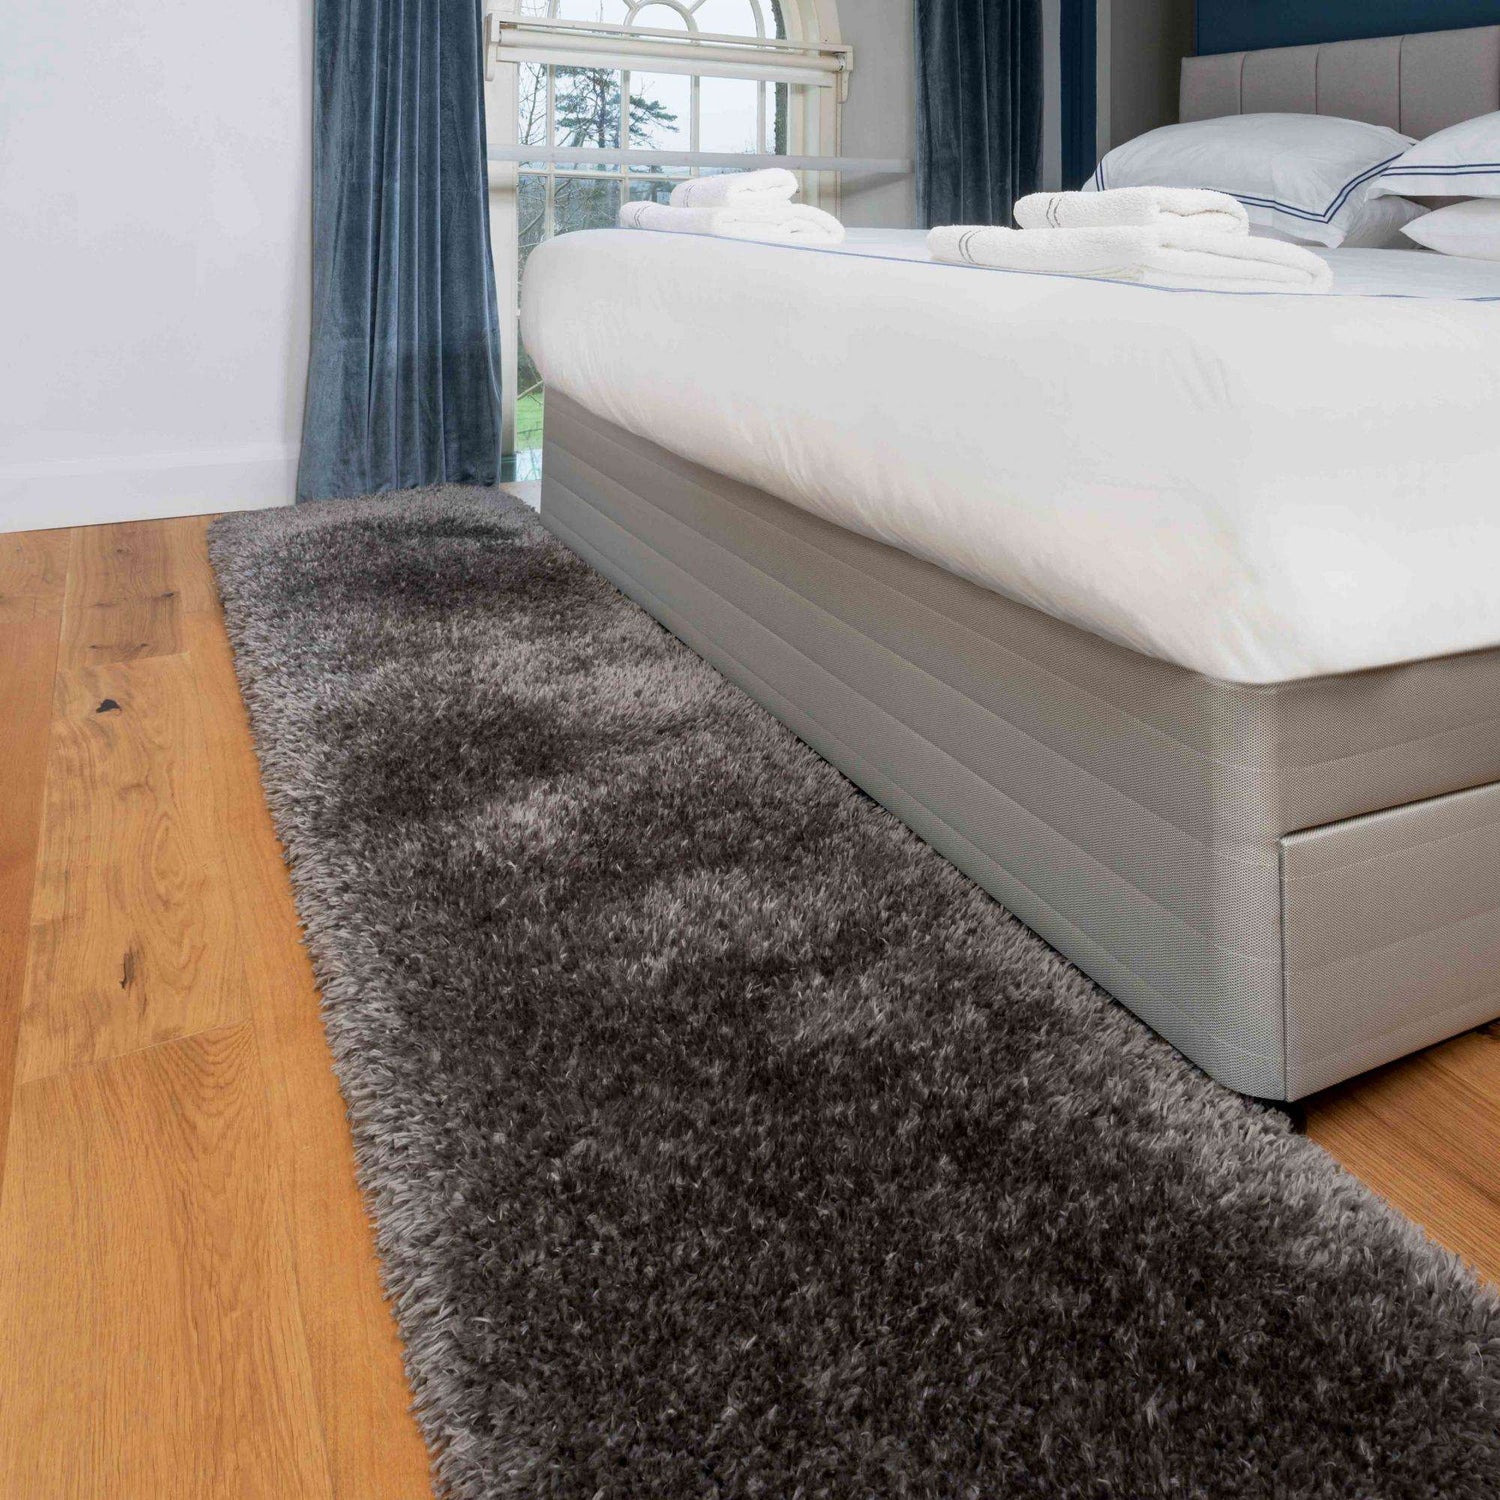 Deluxe Thick Soft Light Brown Shaggy Bedroom Rug